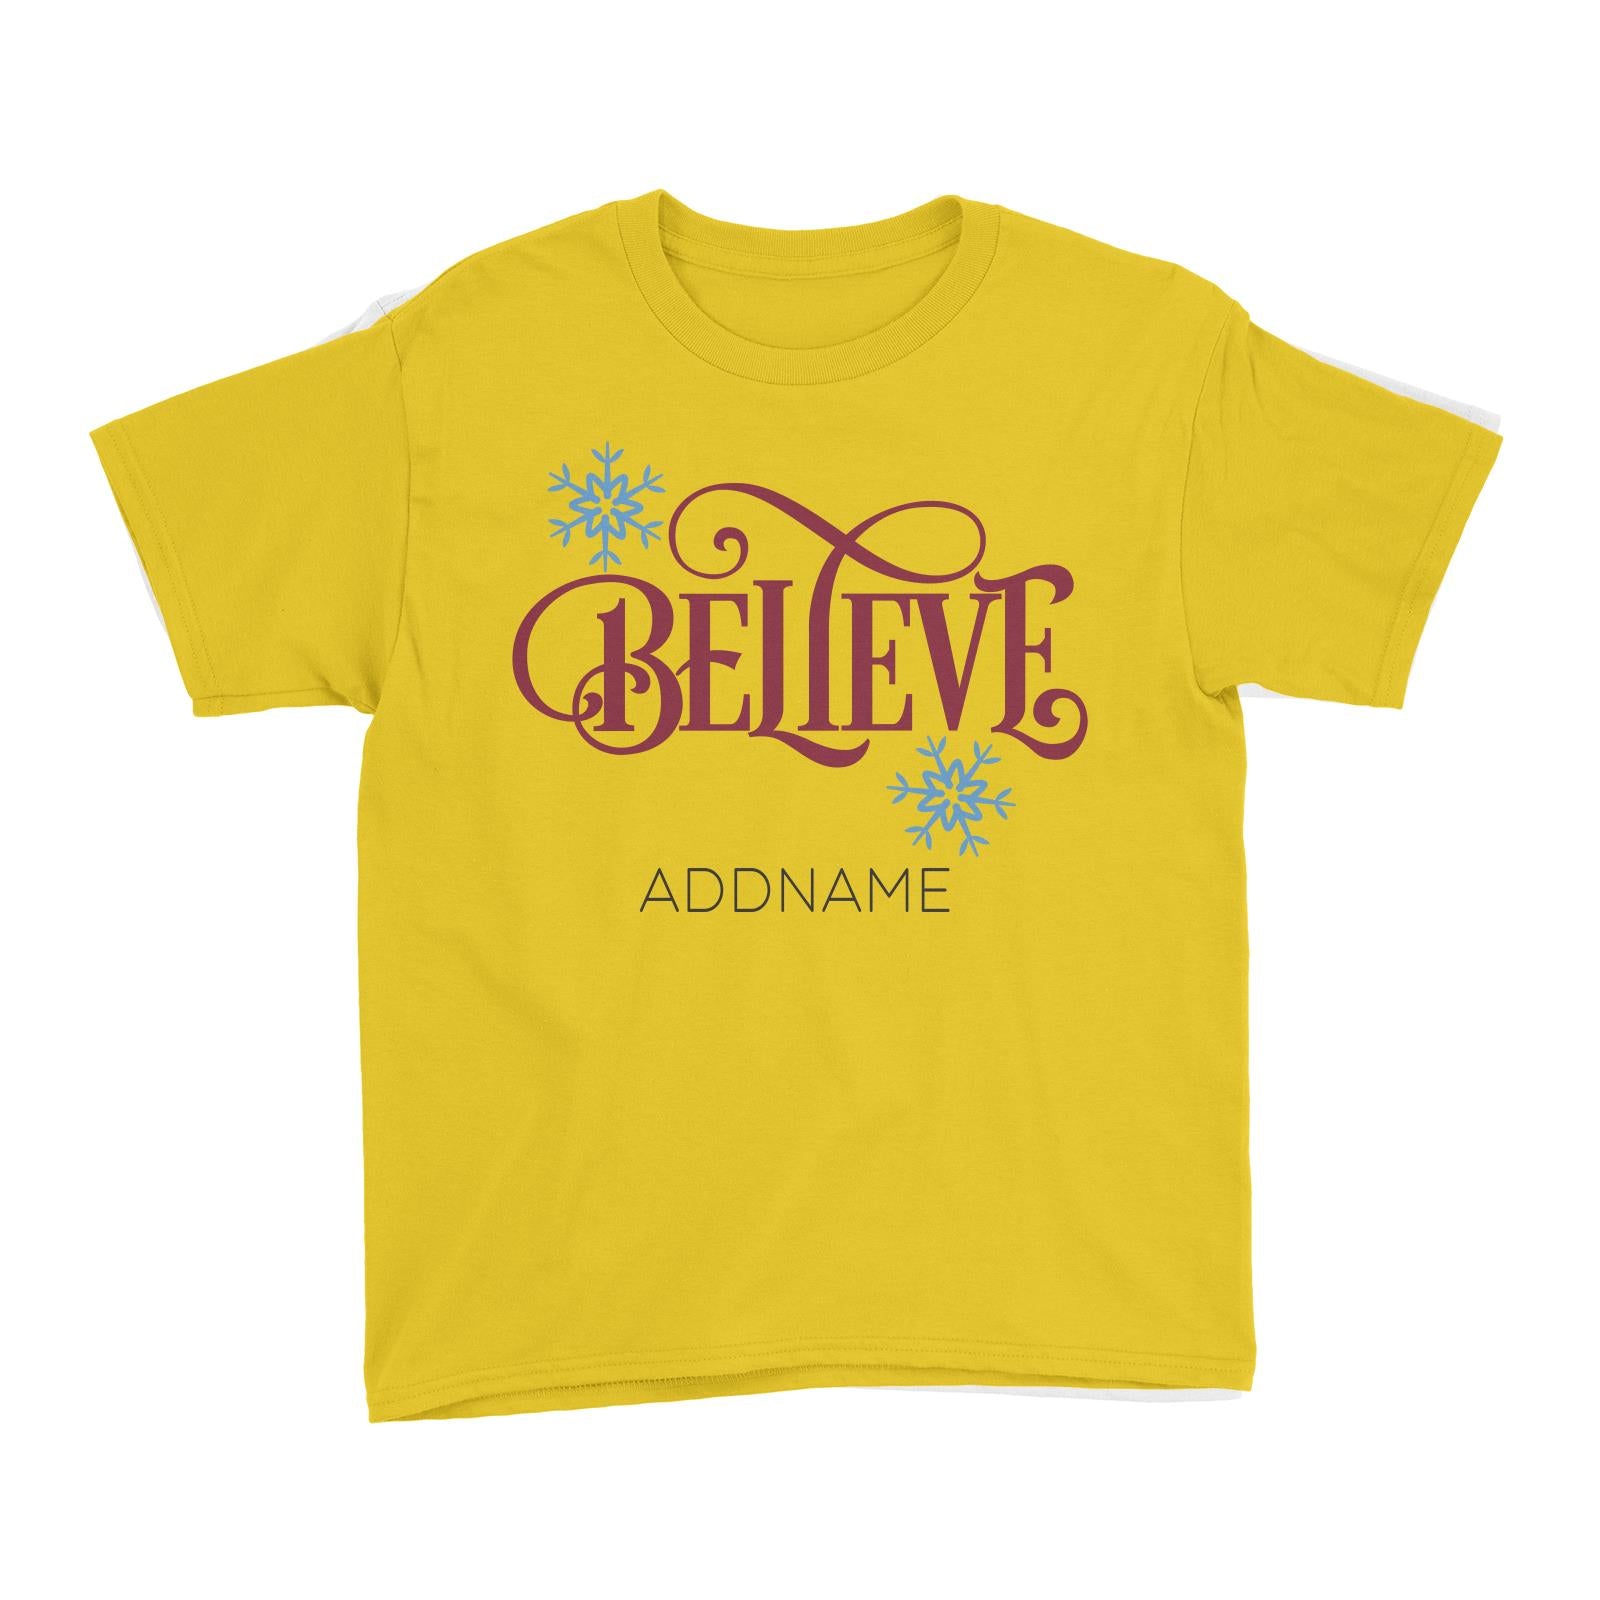 Xmas Believe with Snowflakes Kid's T-Shirt